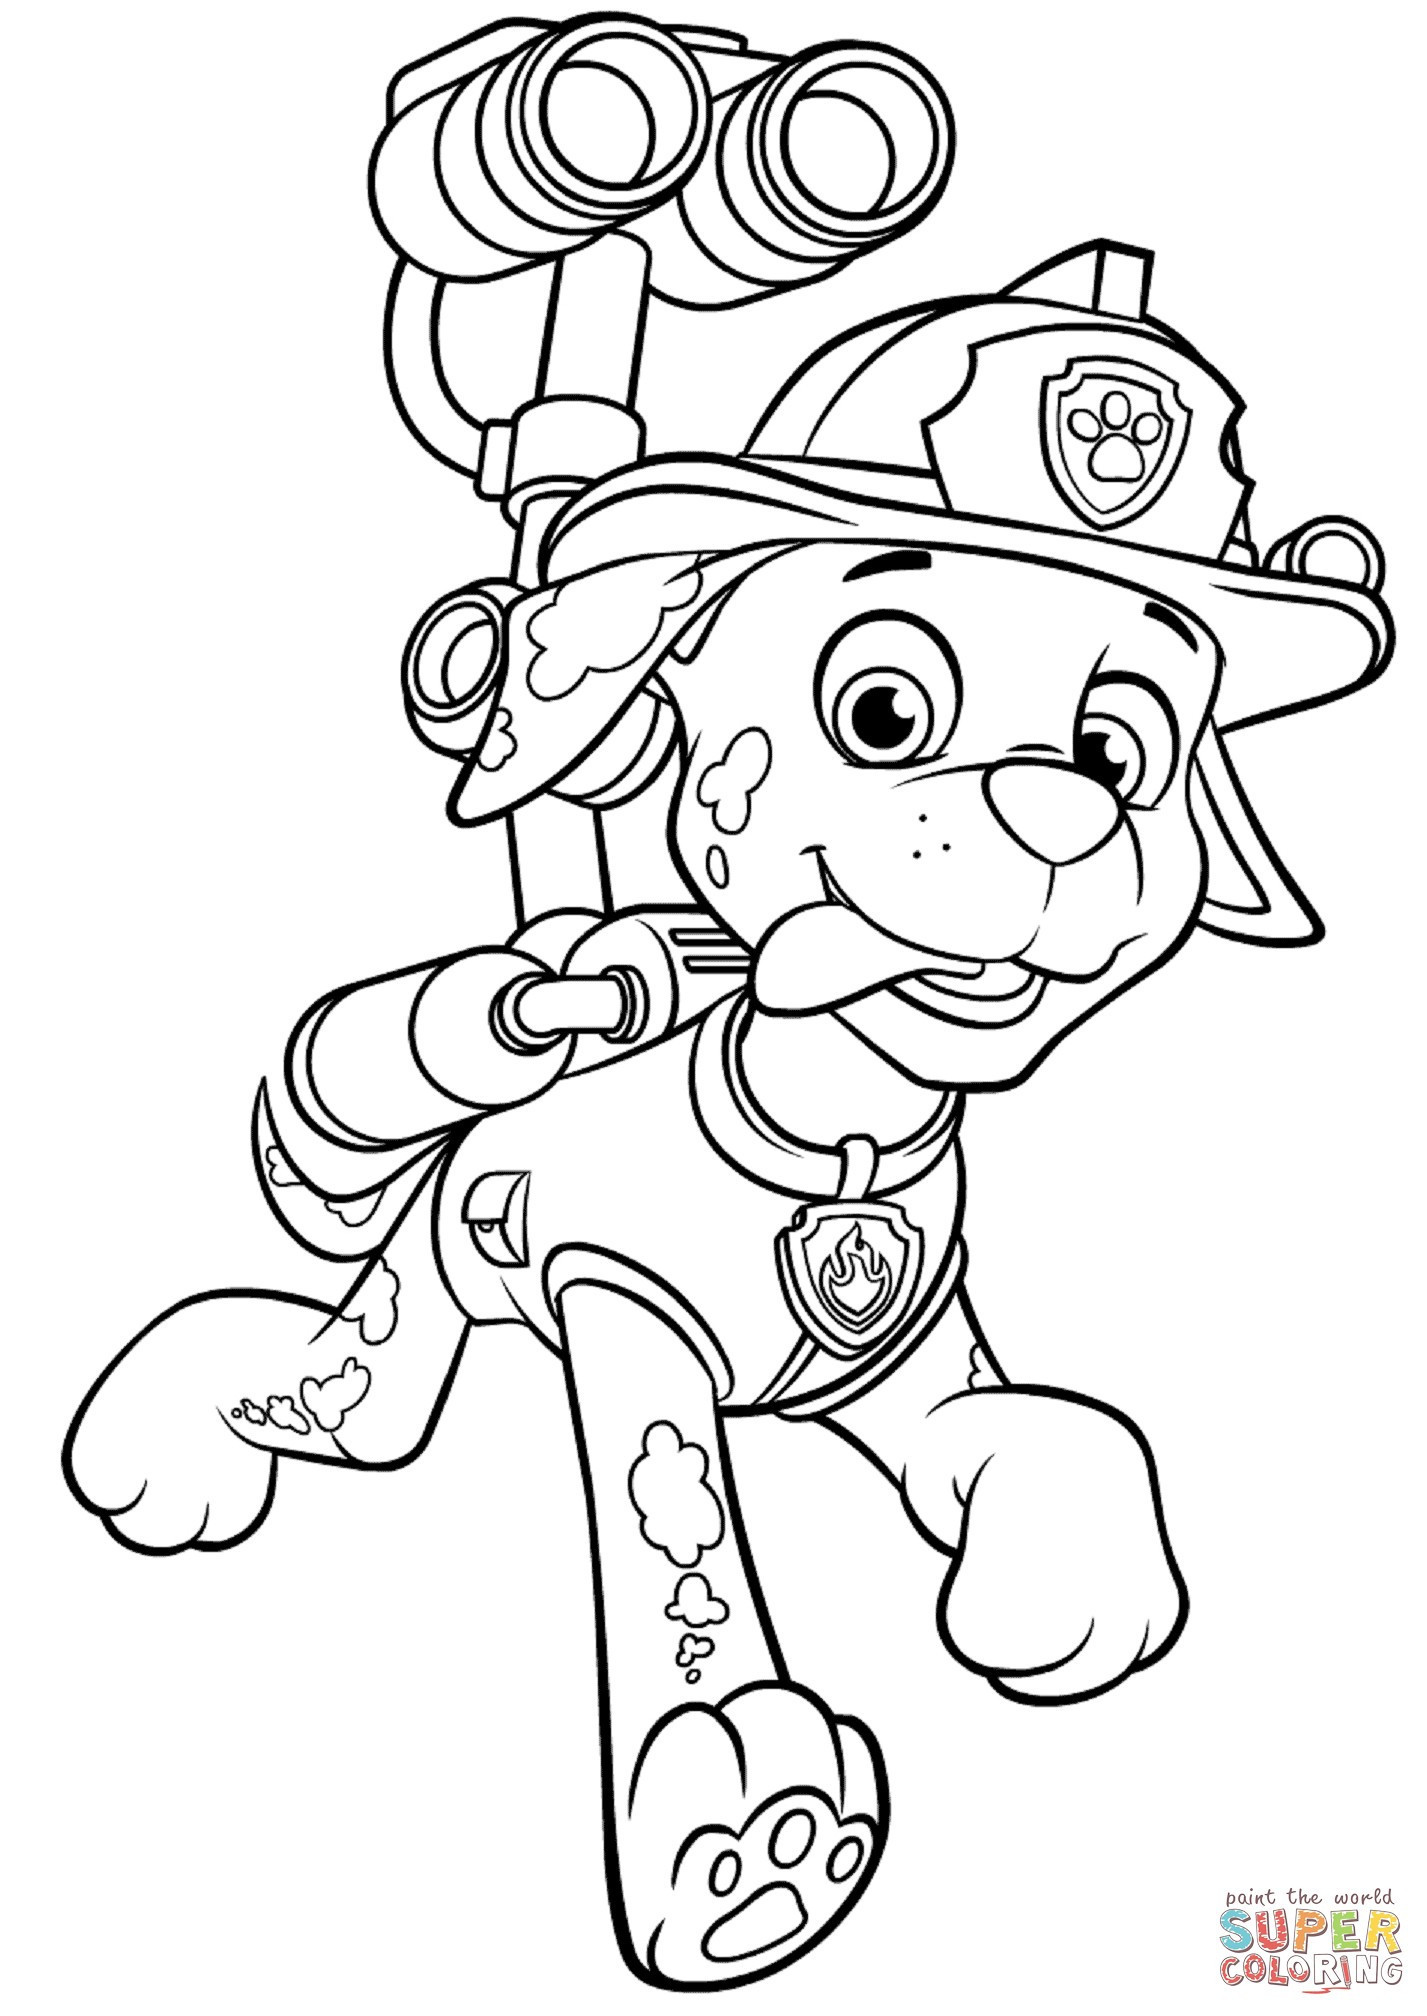 Paw Patrol Coloring Pages Marshall
 Paw Patrol Marshall Drawing thekindproject